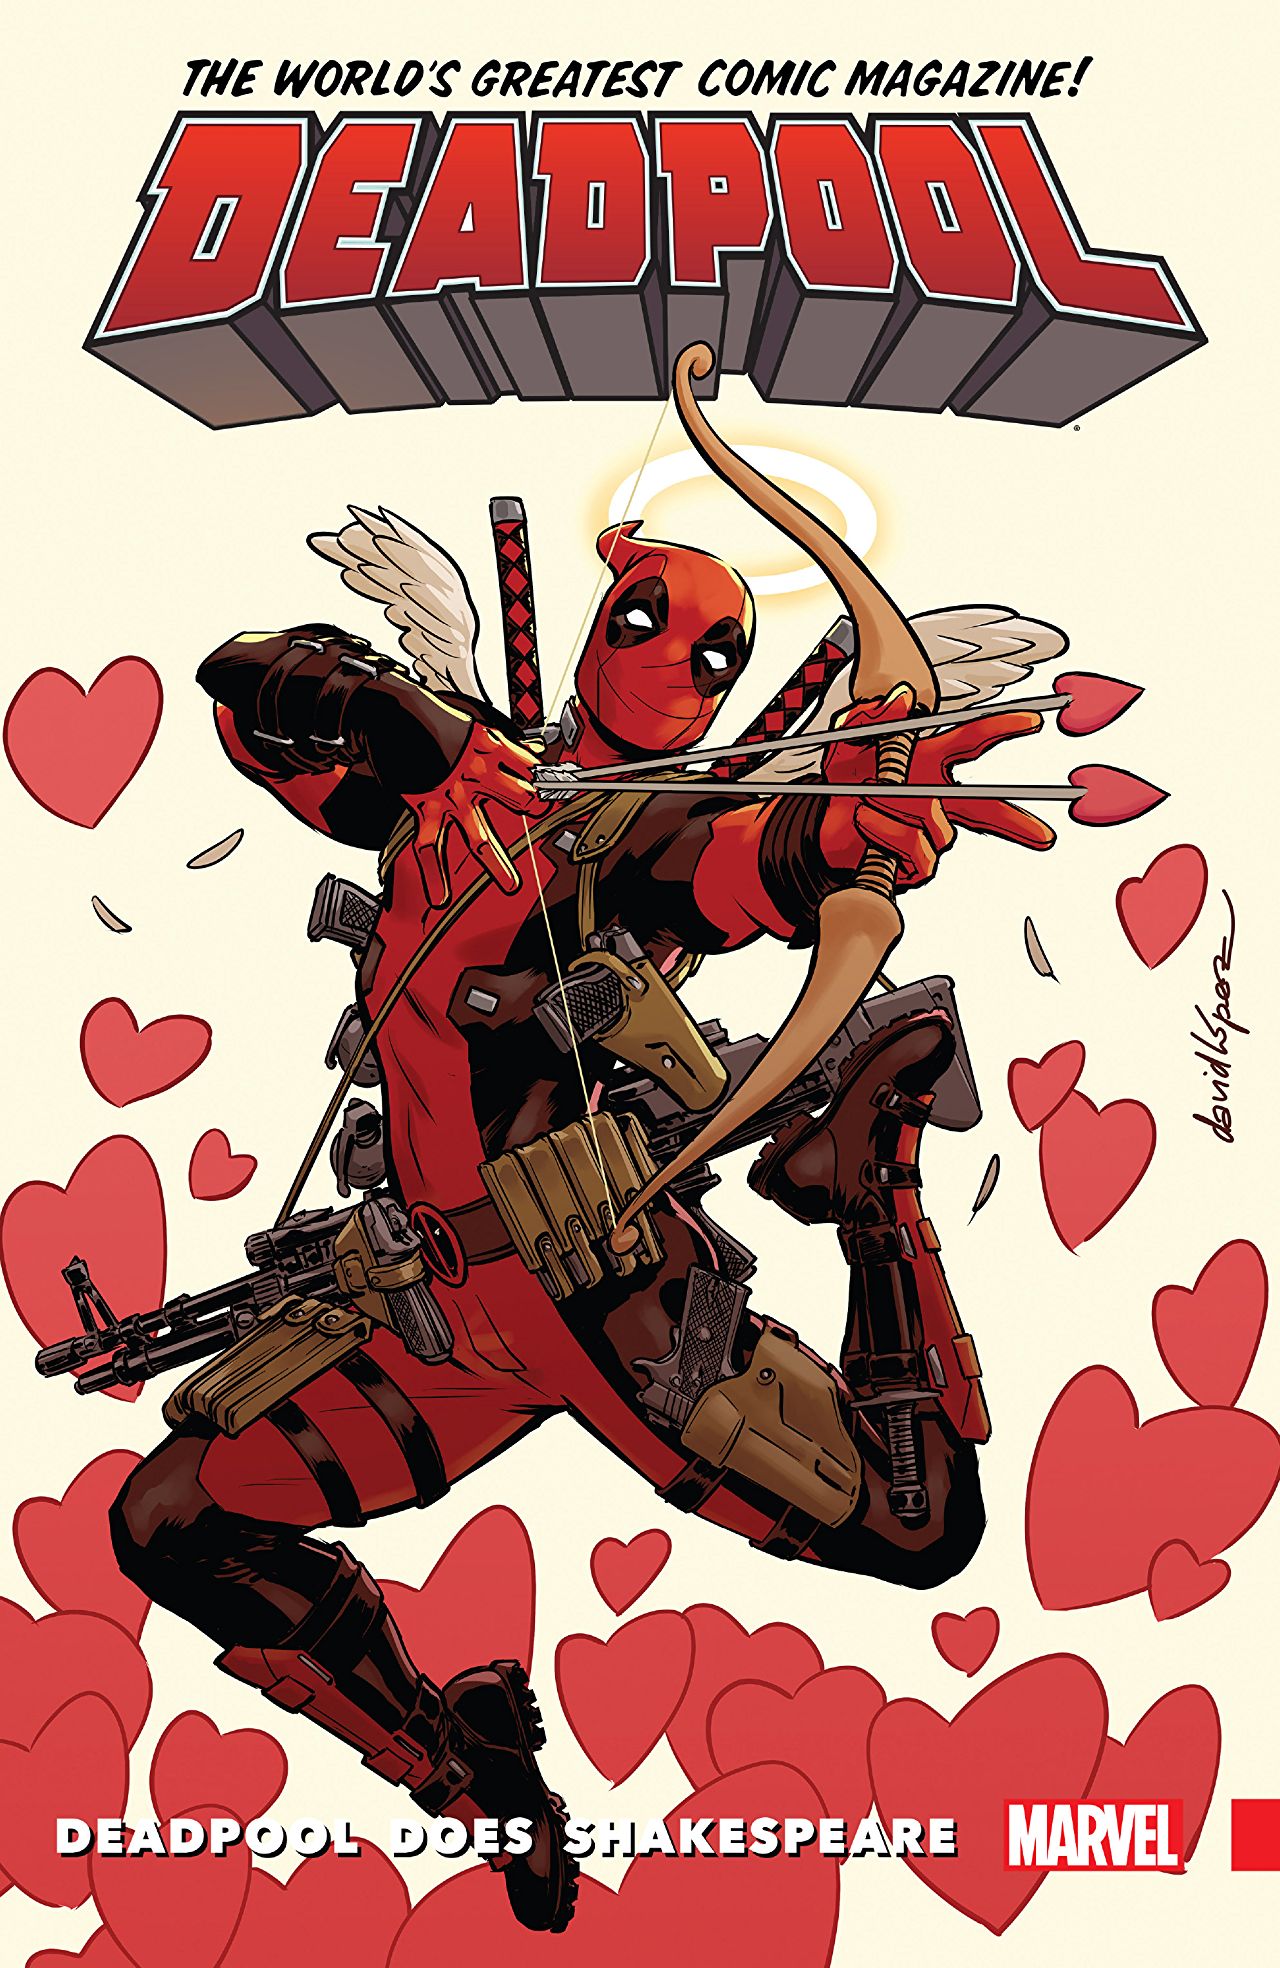 'Deadpool: World's Greatest Vol. 7: Deadpool Does Shakespeare' is a fun, if disconnected collection